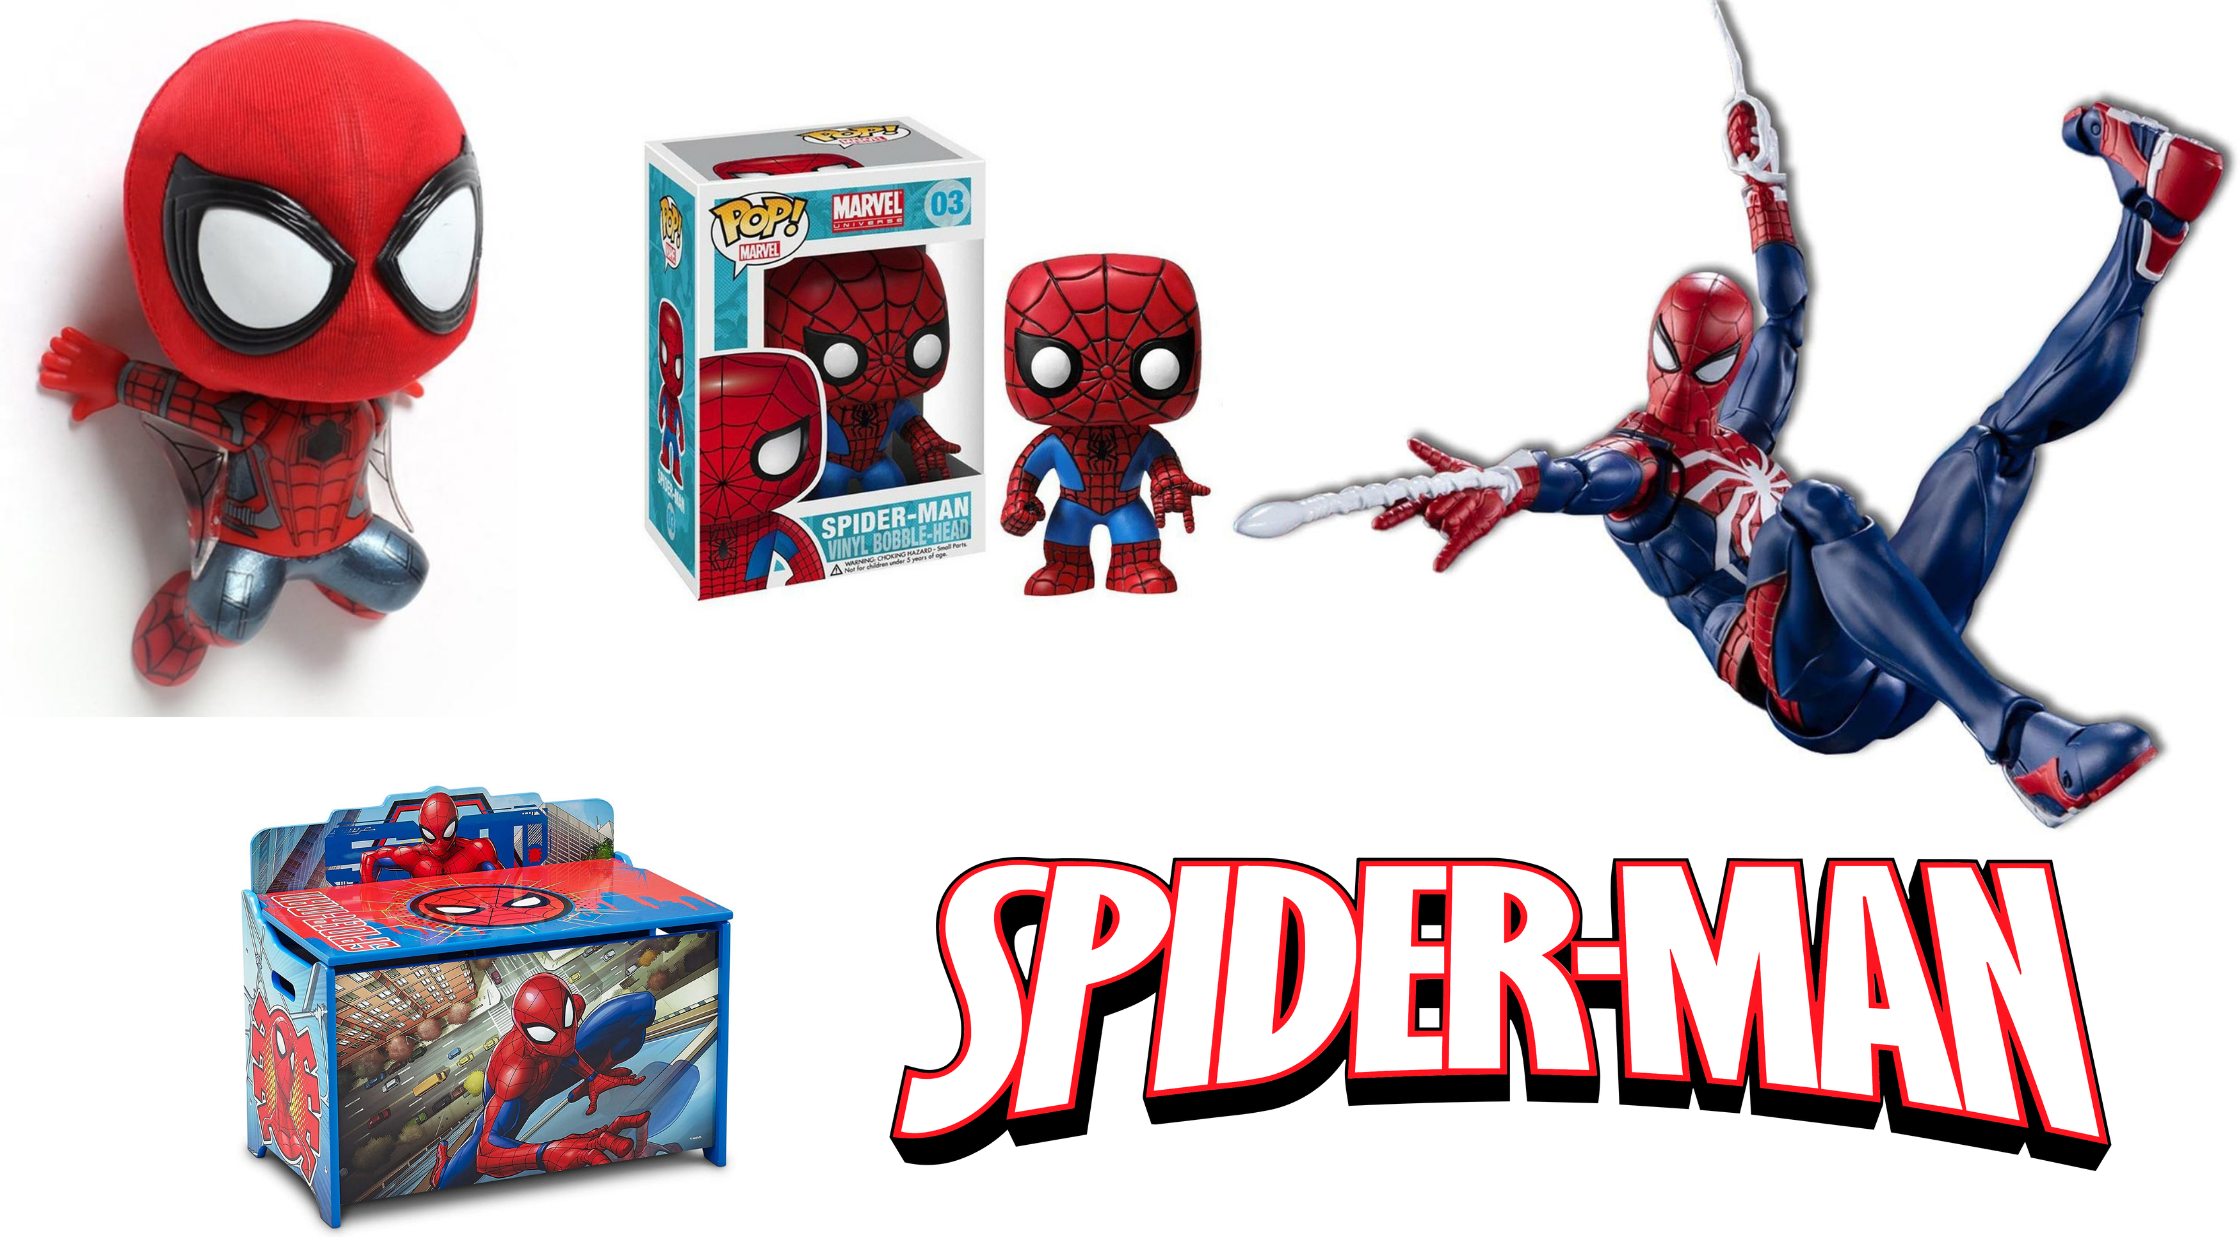 Spiderman toys: the most purchased toys of the Marvel franchise